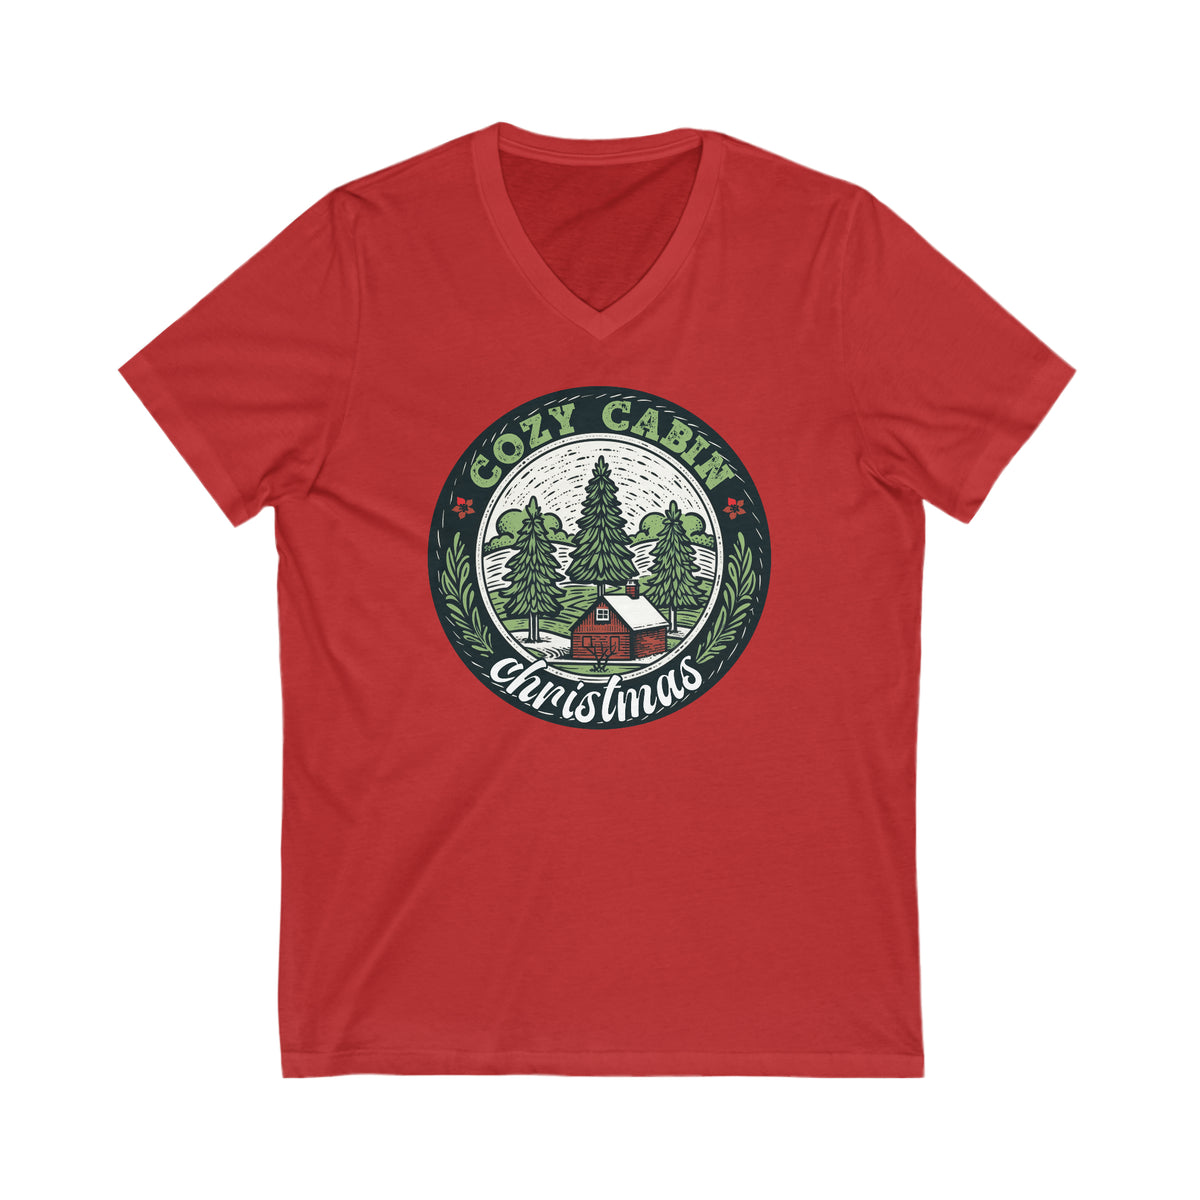 Cozy Cabin Christmas Tree Shirt | Vintage Christmas Gift For Her | Unisex Jersey V-neck T-shirt